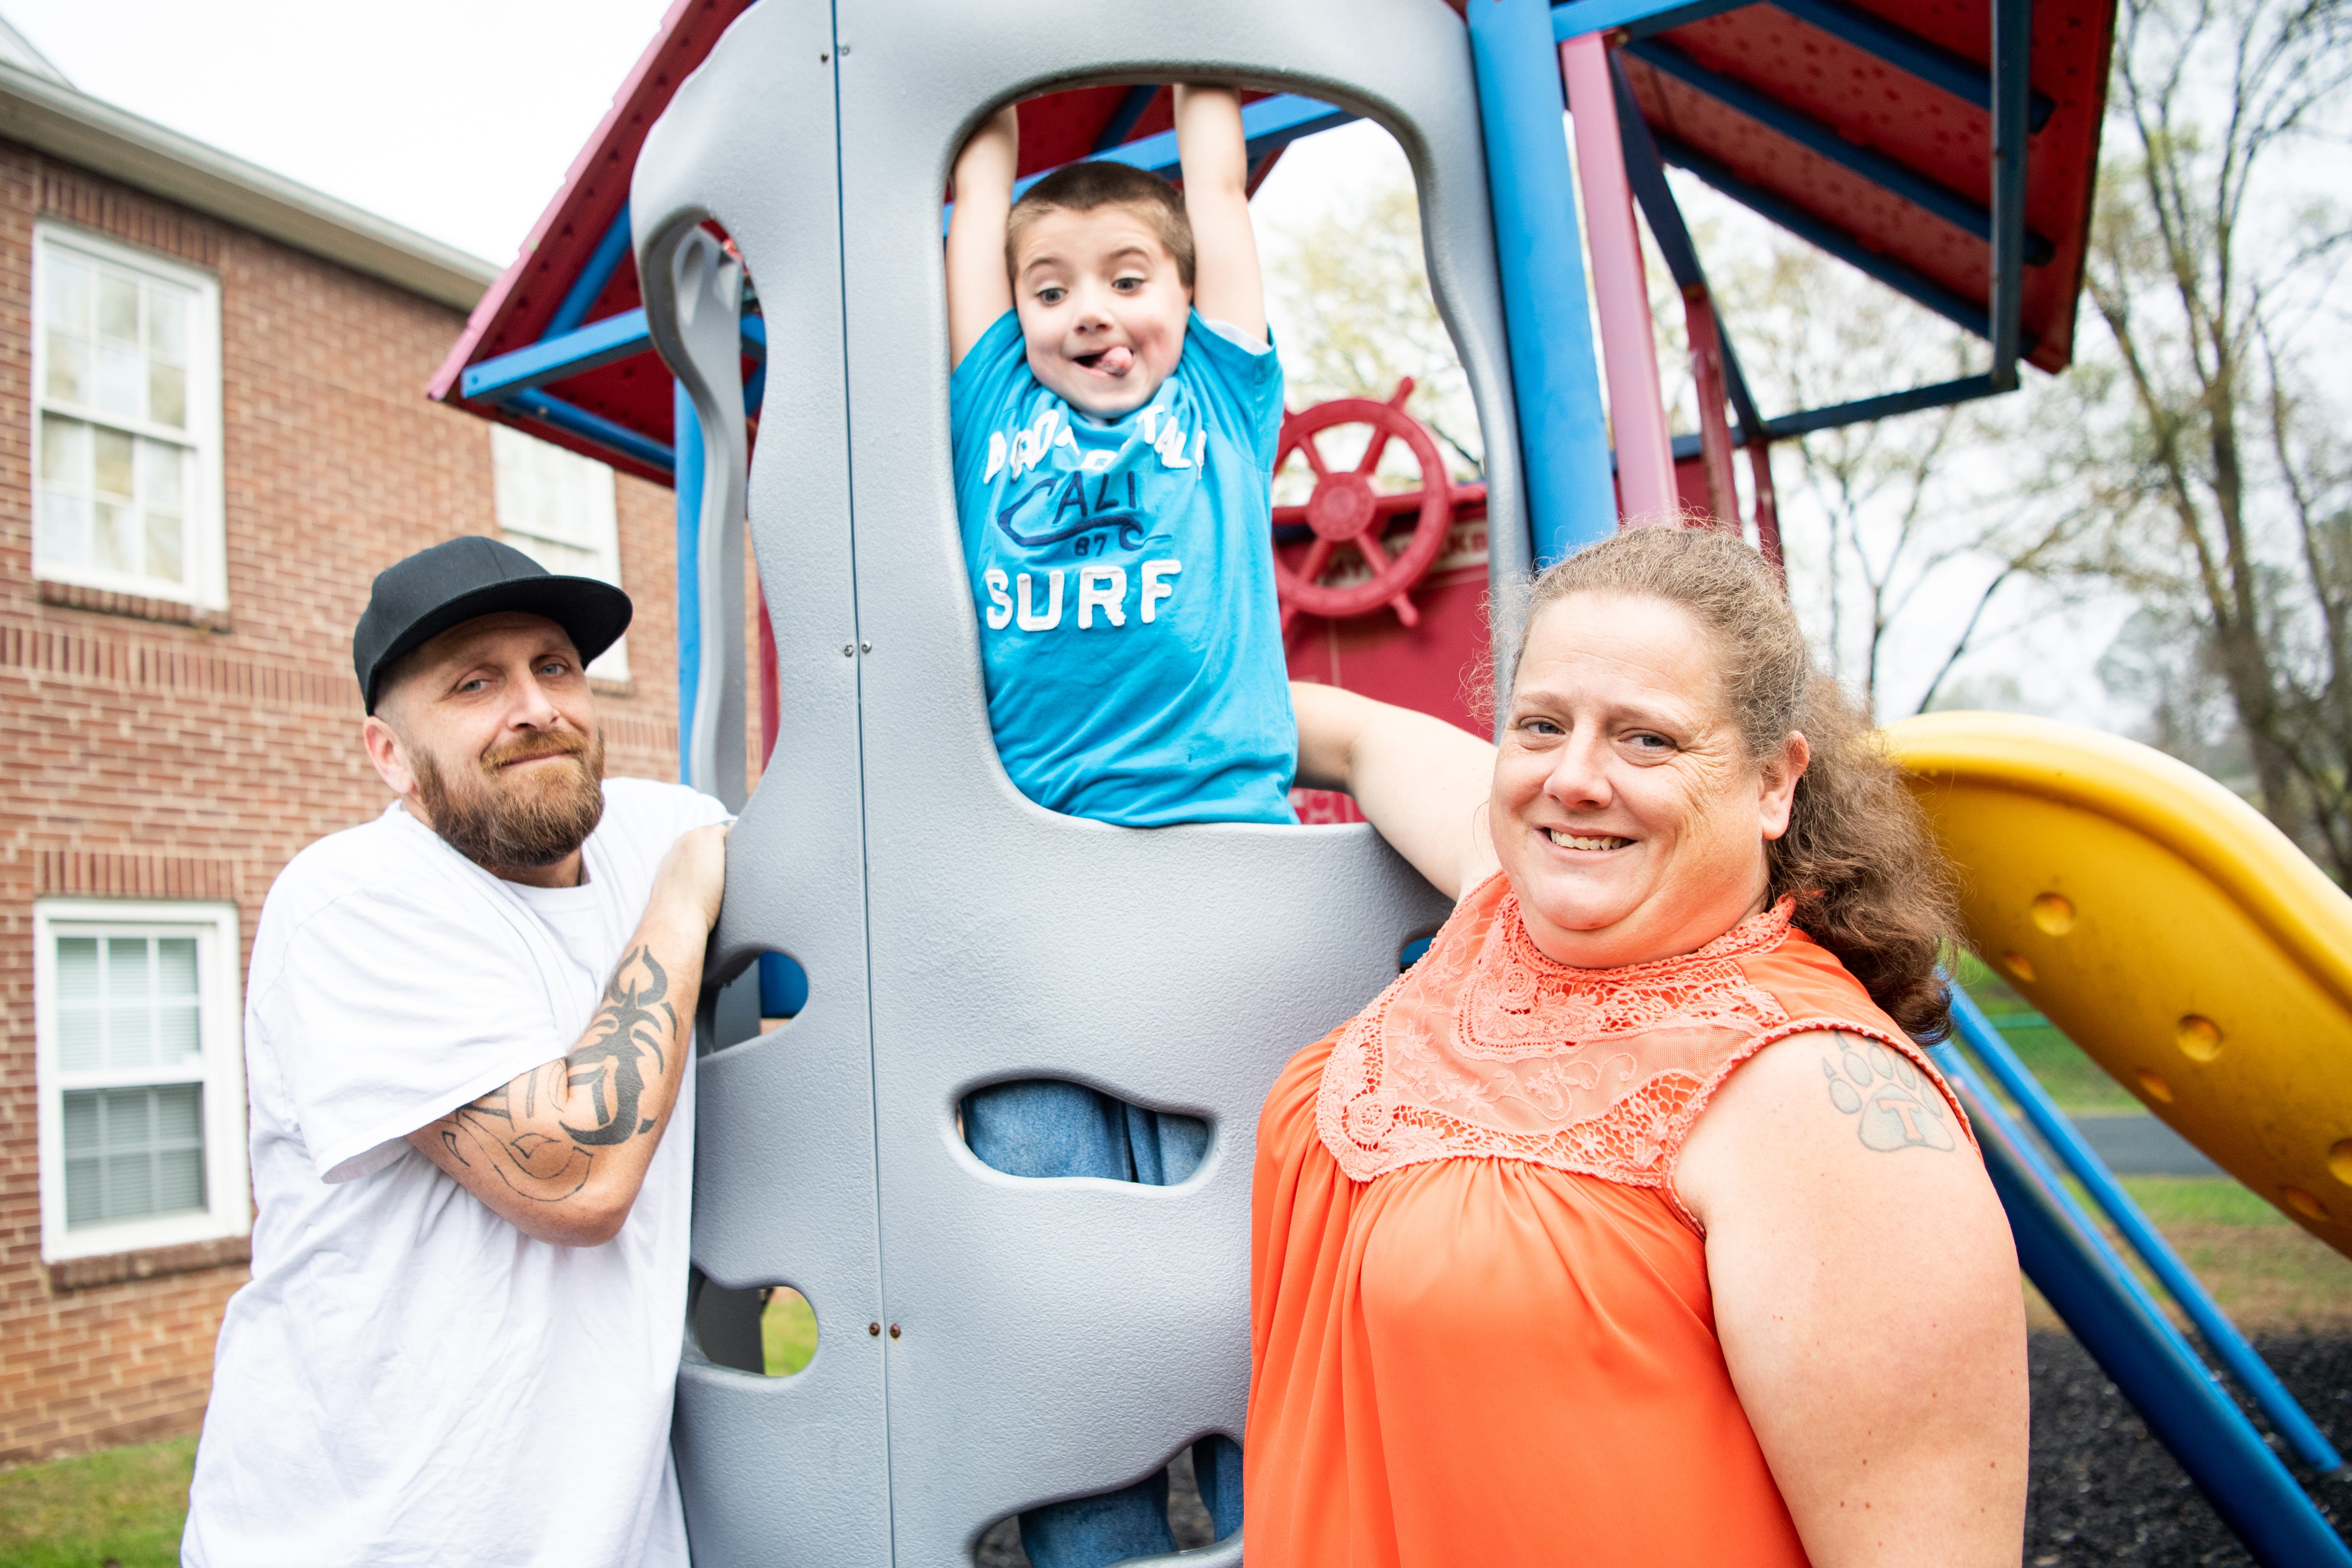 Robert, William and Jennifer Rose at the Riverside Baptist Church playground in Knoxville in March. Jennifer Rose was so impressed by the success her son experienced with applied behavior analysis therapy that she went back to school and became a registered behavior technician and a behavior analyst.